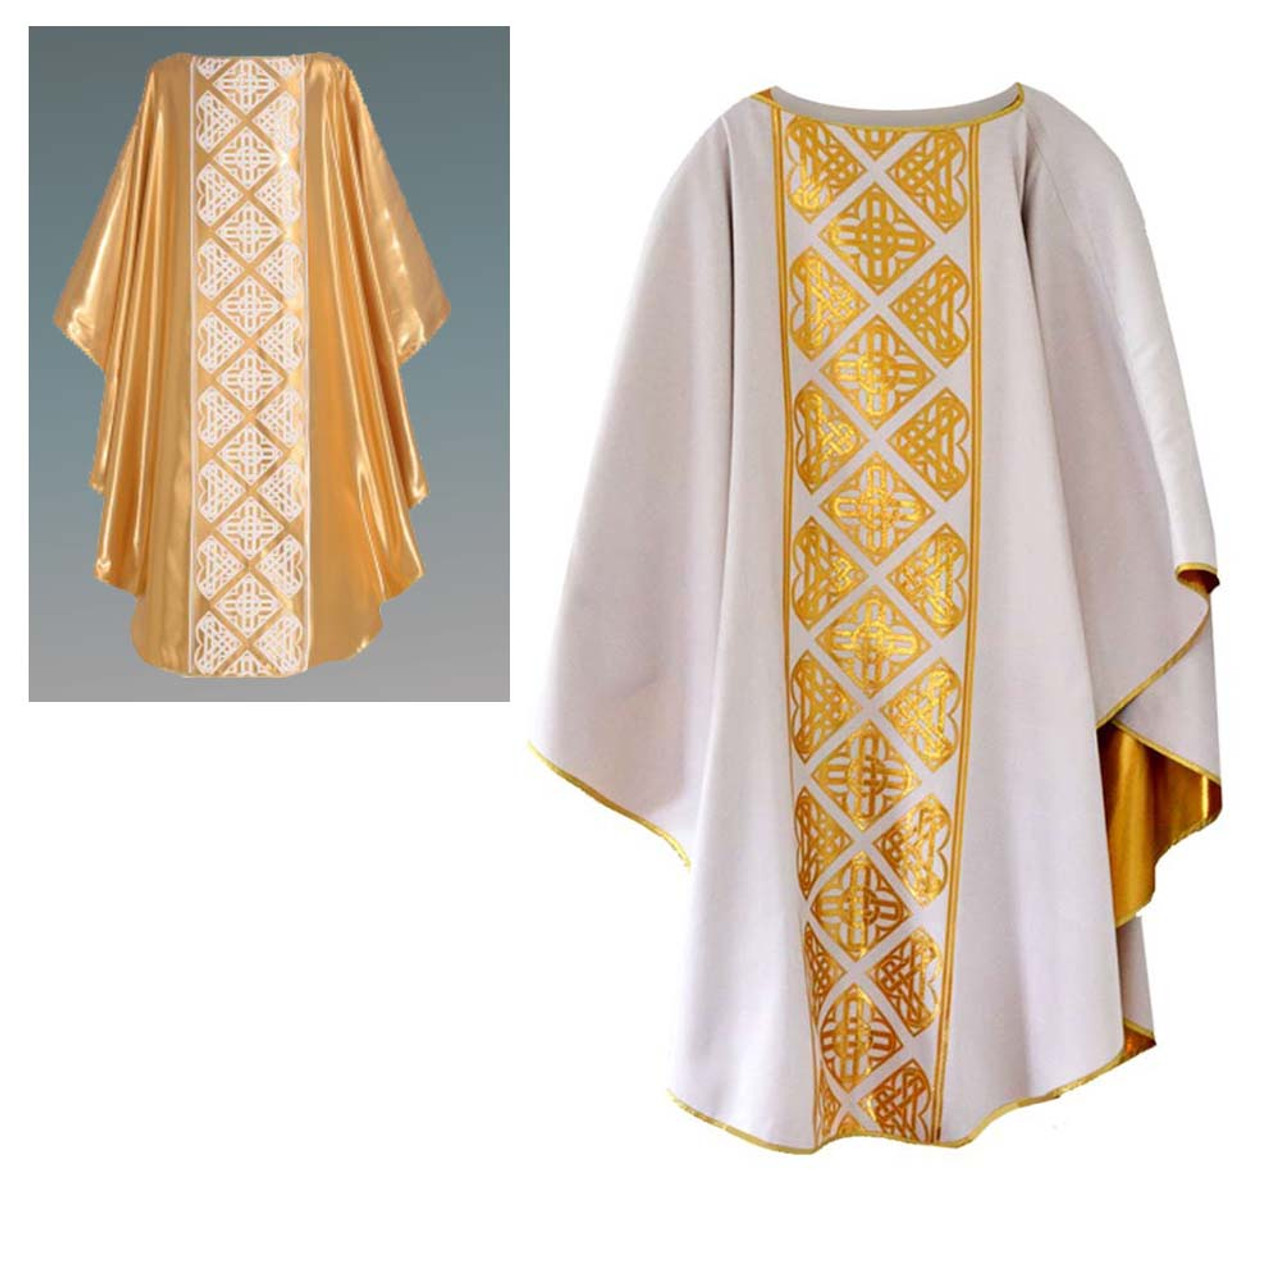 6315 Chasuble in Gold/Off White from Houssard